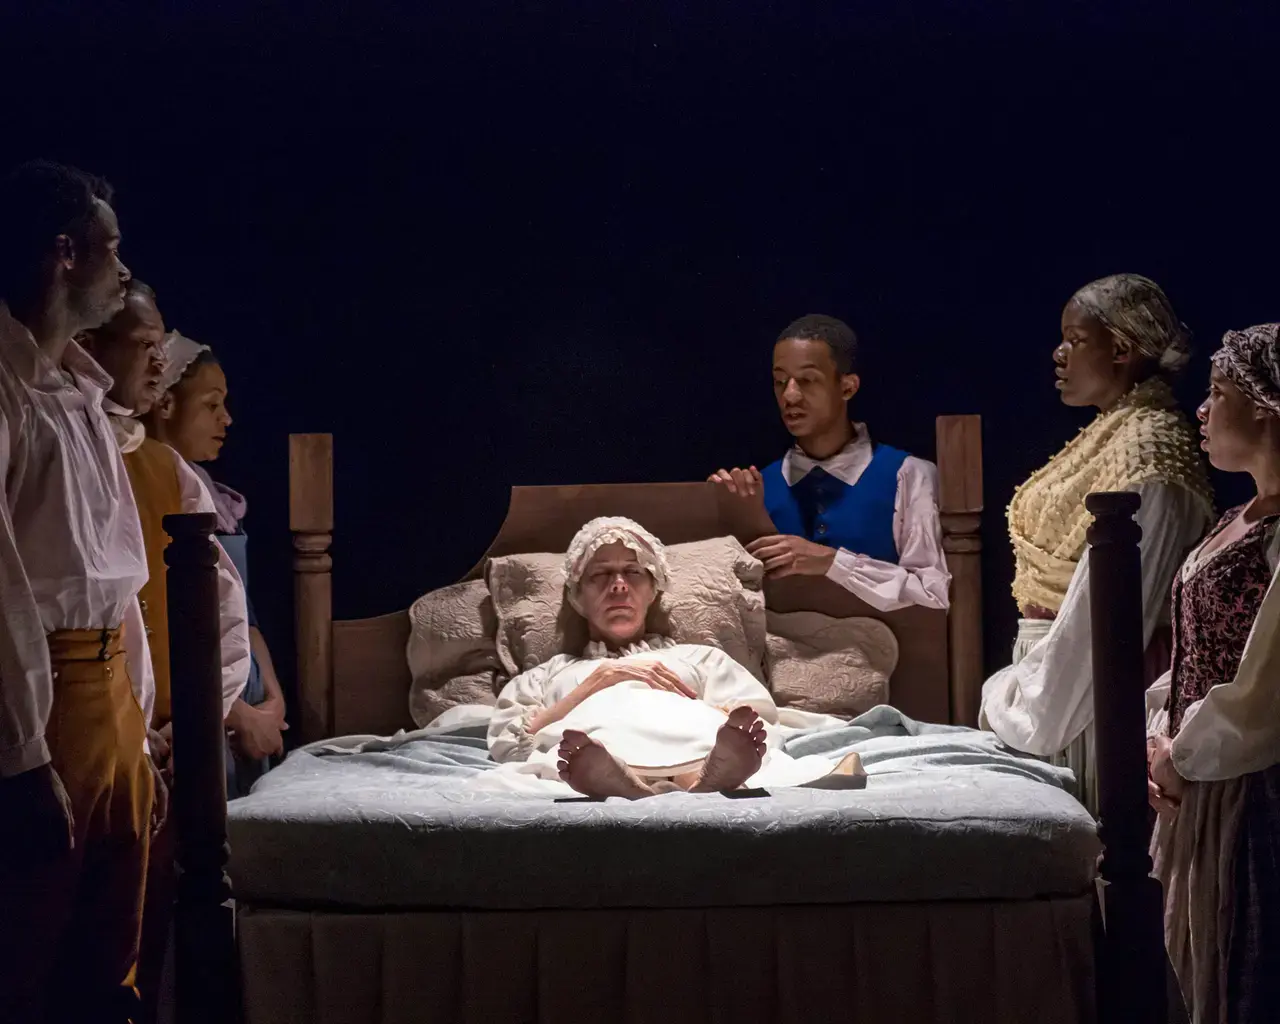 Production photo of James Ijames&rsquo; The Most Spectacularly Lamentable Trial of Miz Martha Washington&nbsp;at Flashpoint Theatre Company, 2014. Photo by Ian Paul Guzzone.